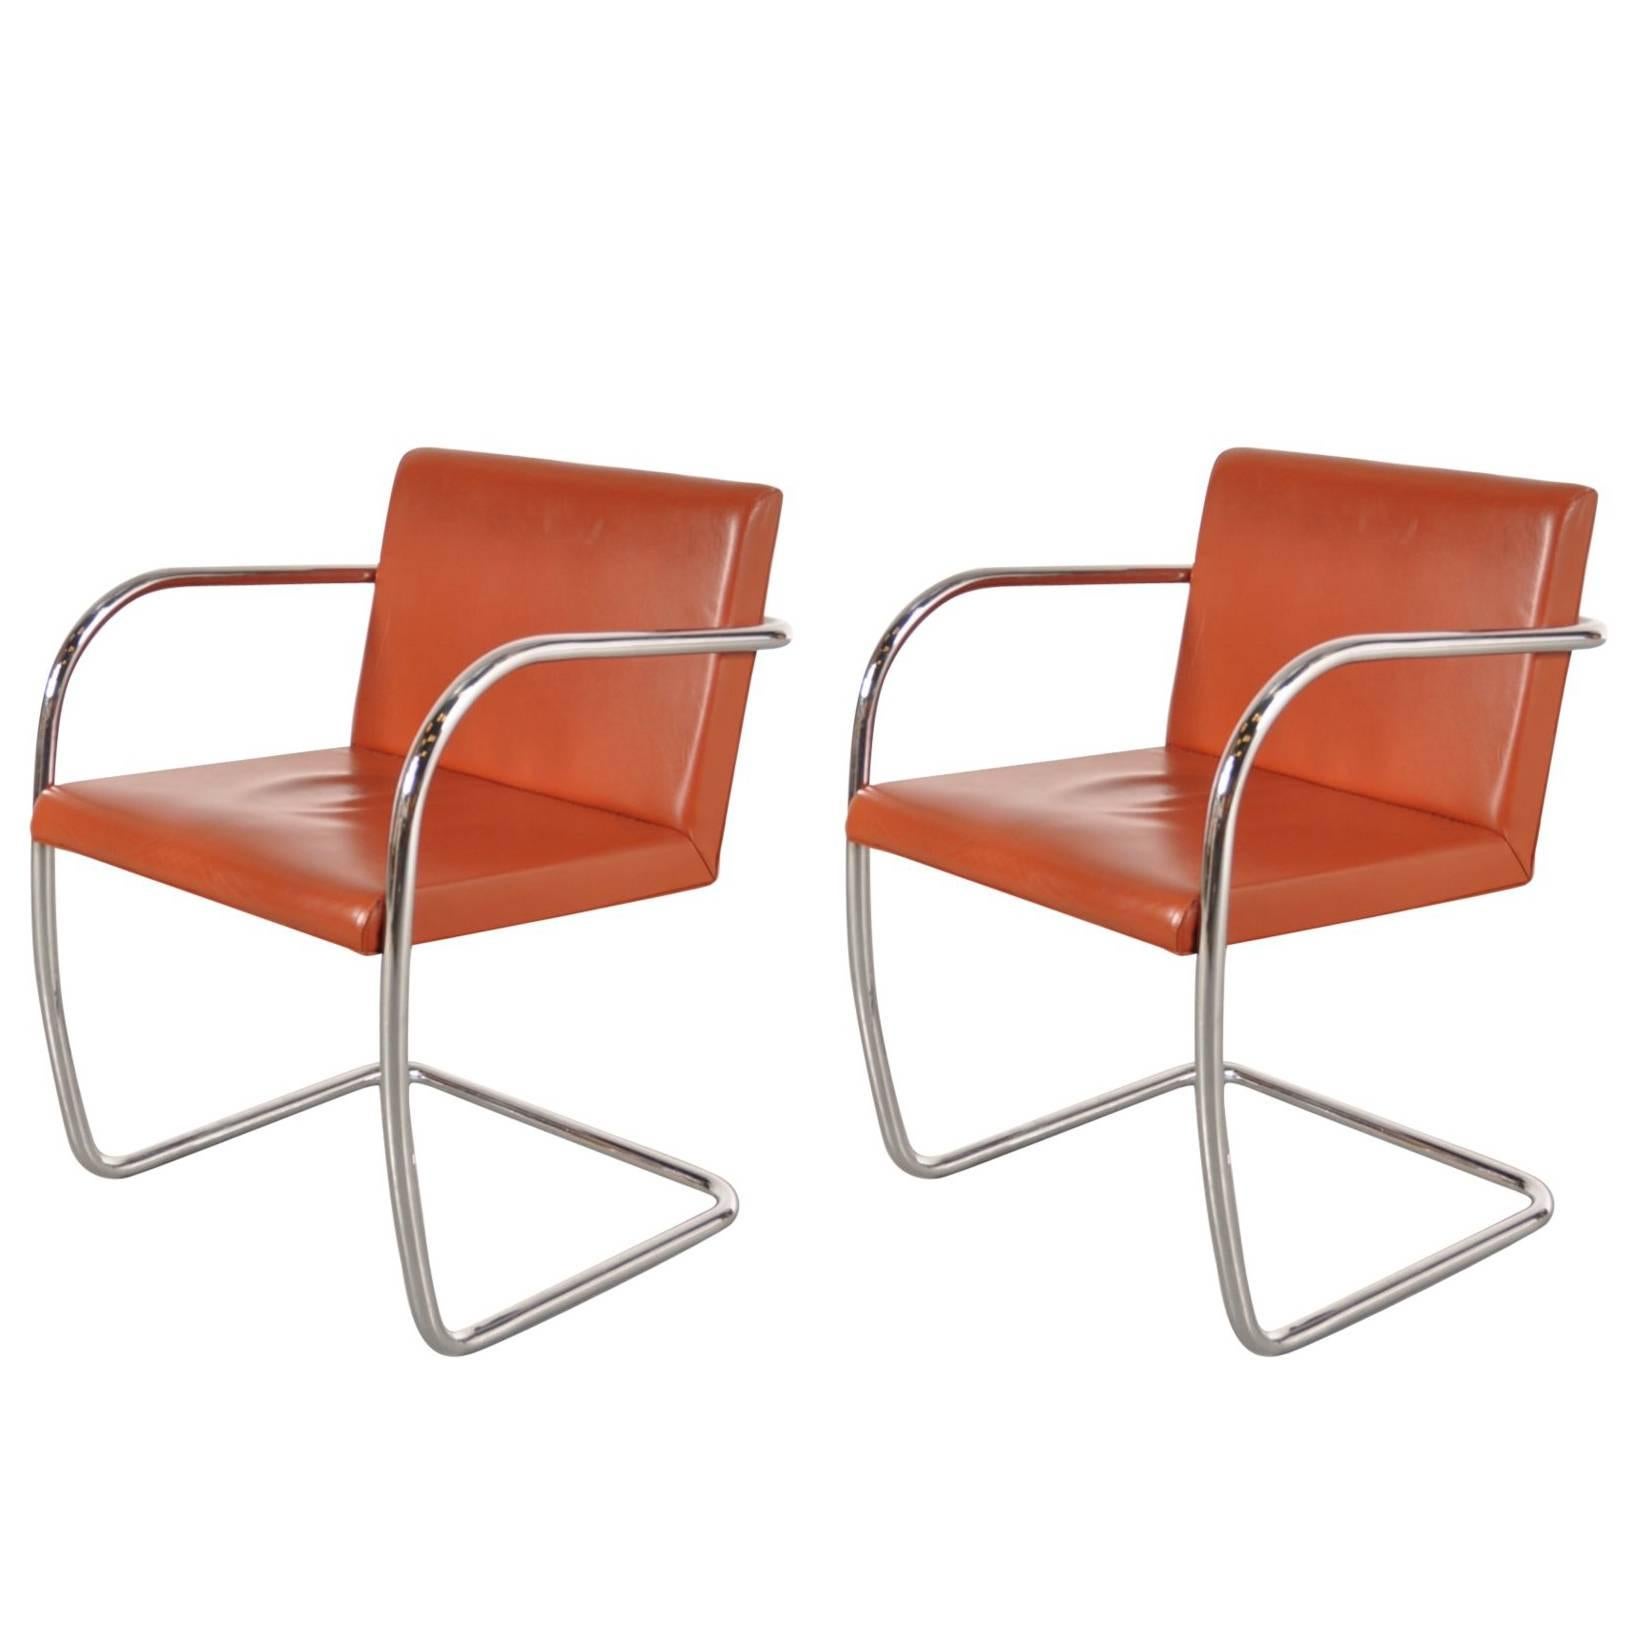 Stock of "BRNO" Chairs by Mies Van Der Rohe for Knoll International, USA, 1970s